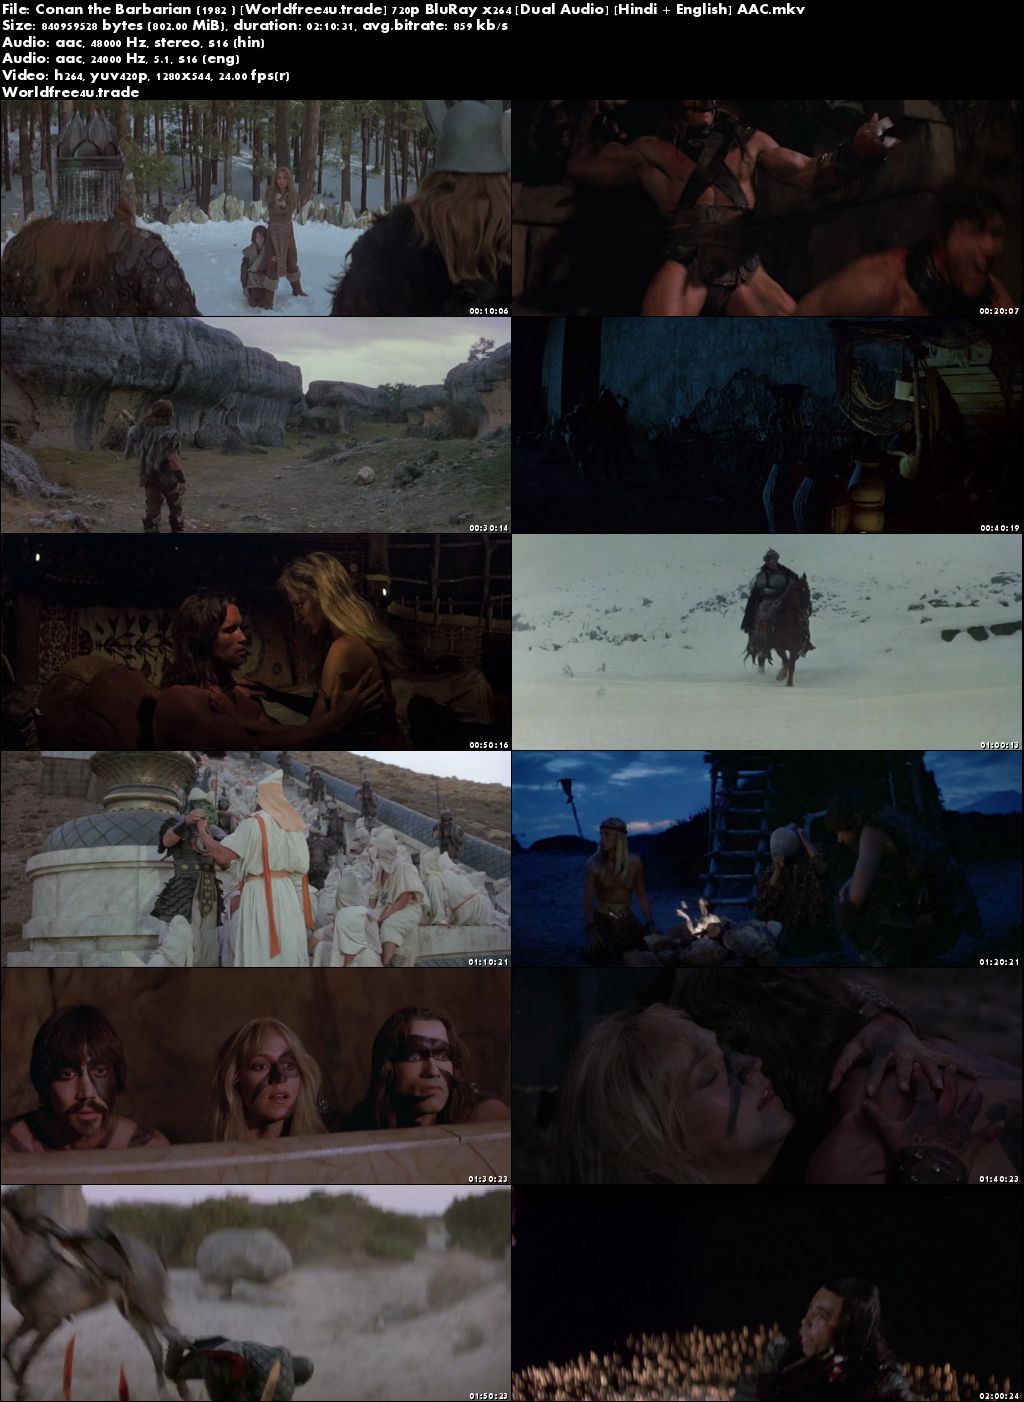 conan the barbarian 2011 full movie torrent download